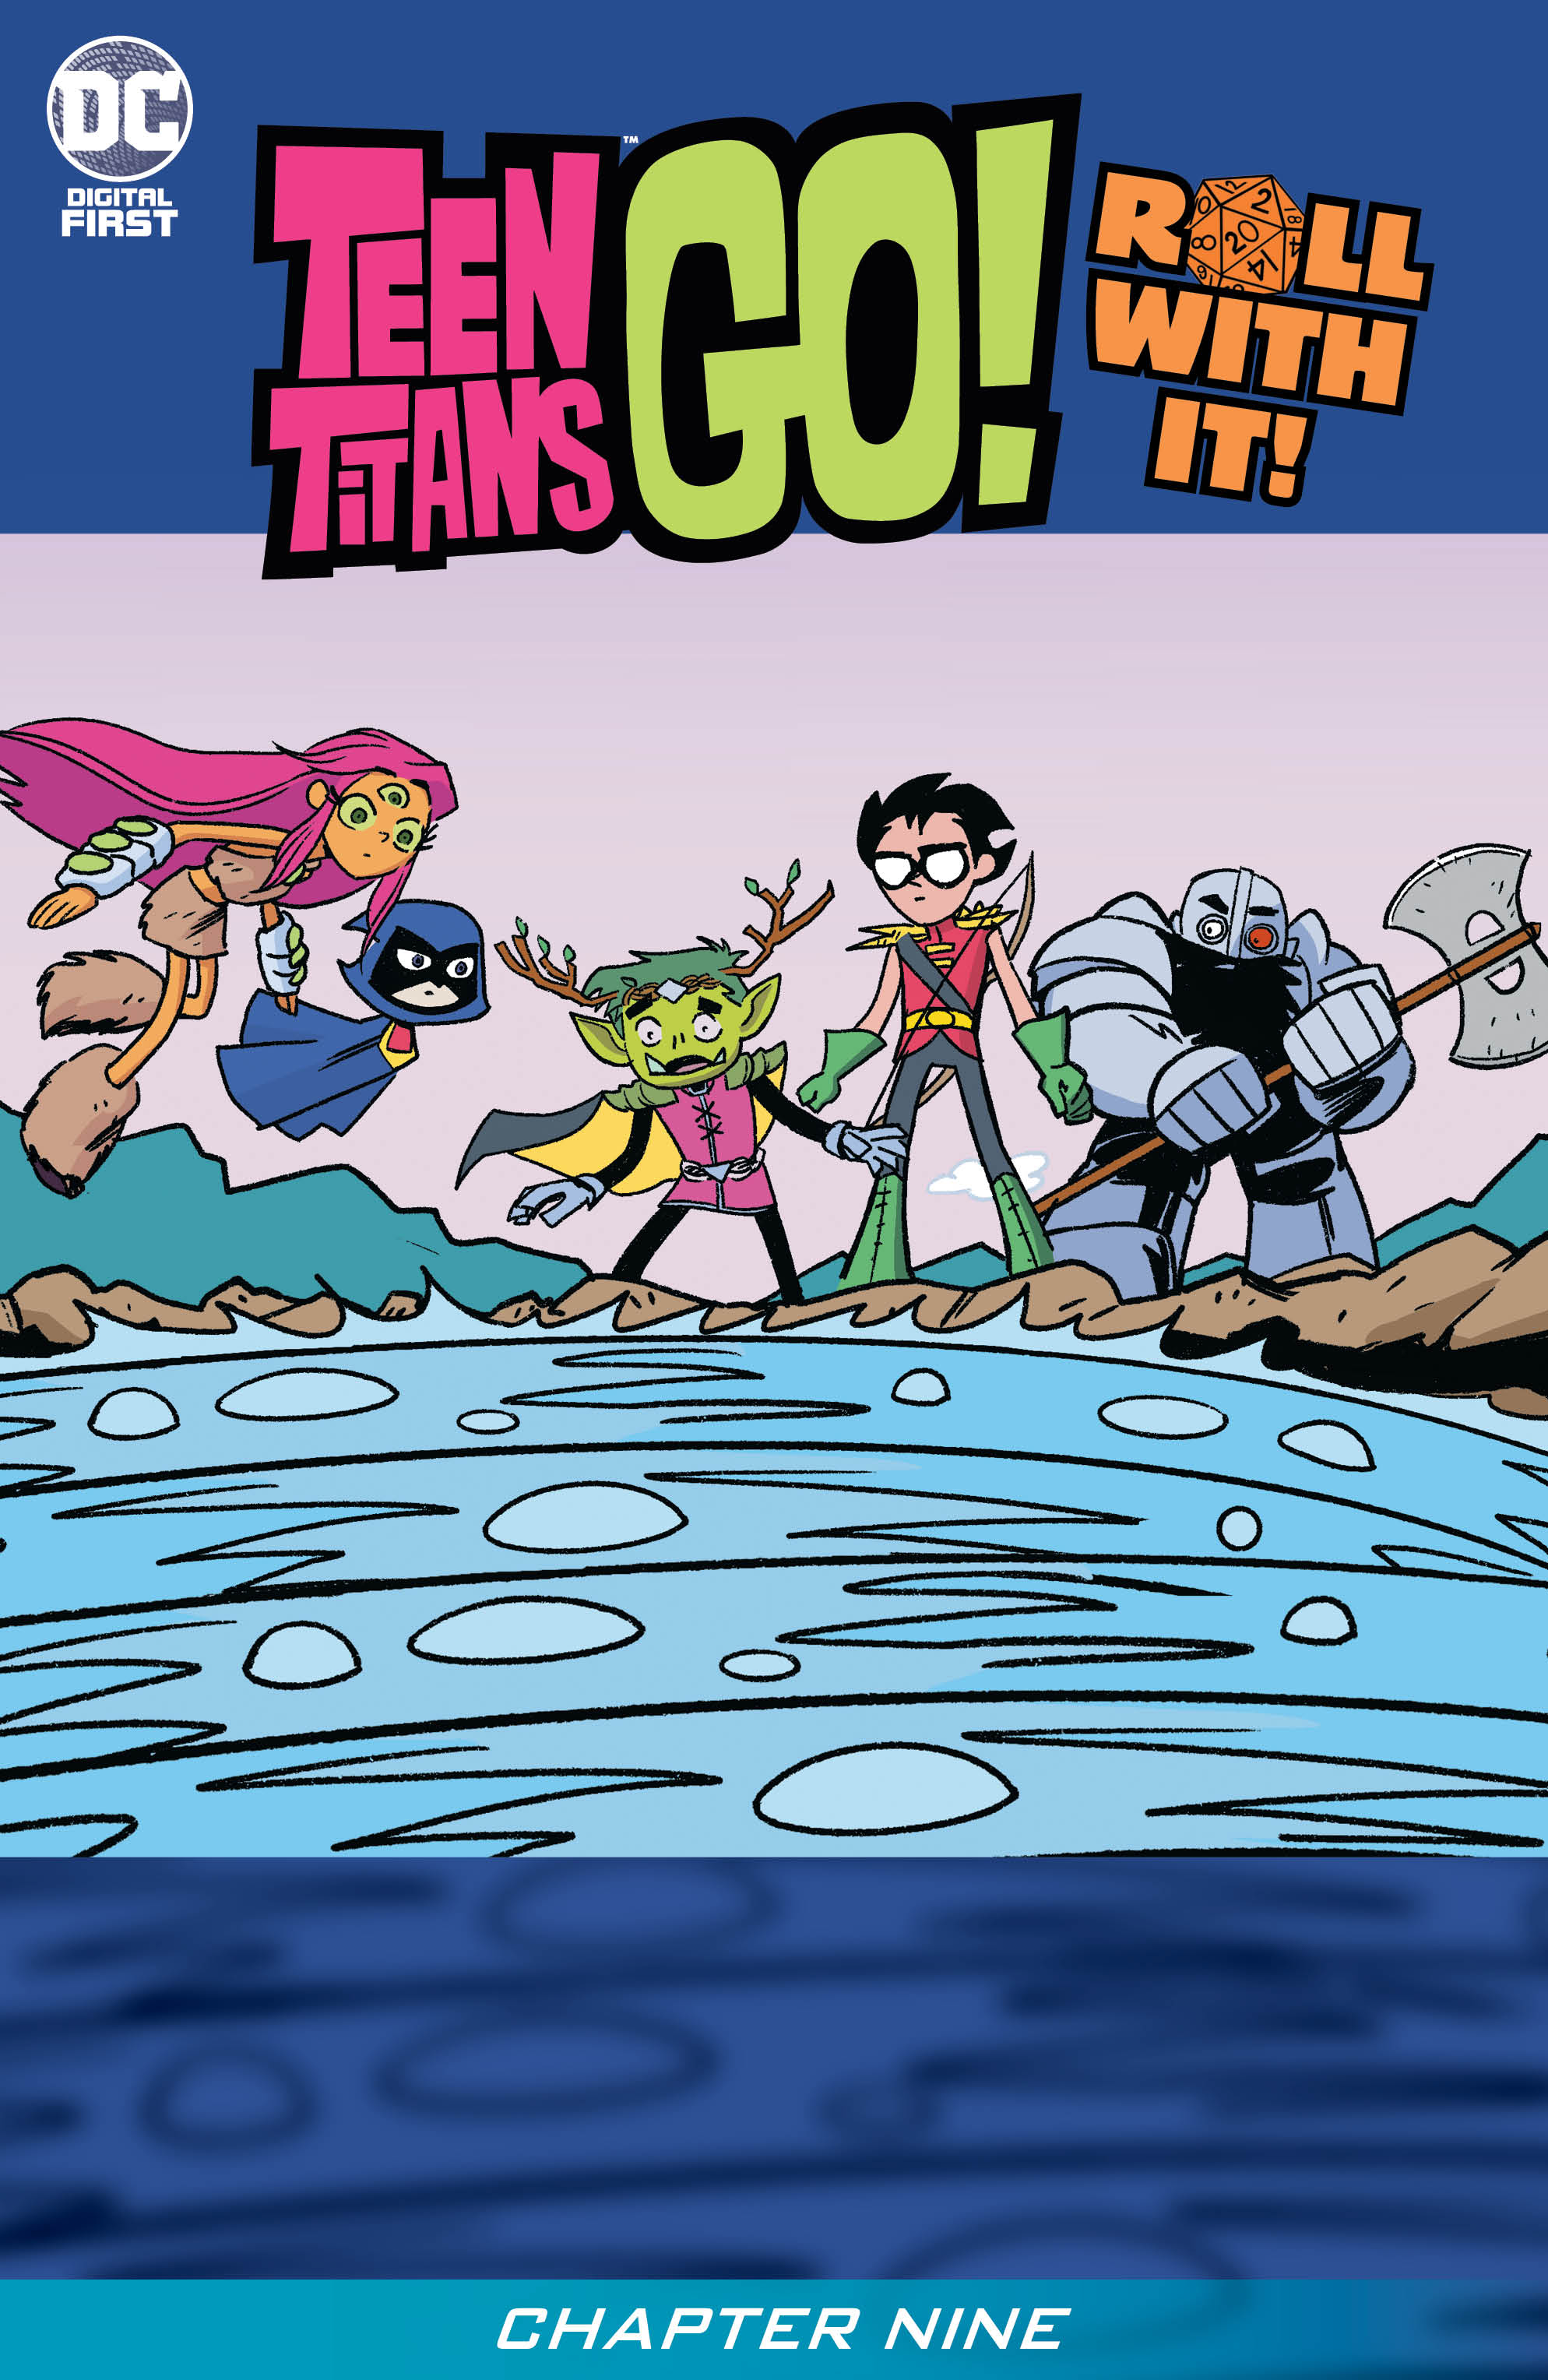 Teen Titans Go! Roll With It! (2020): Chapter 9 - Page 2